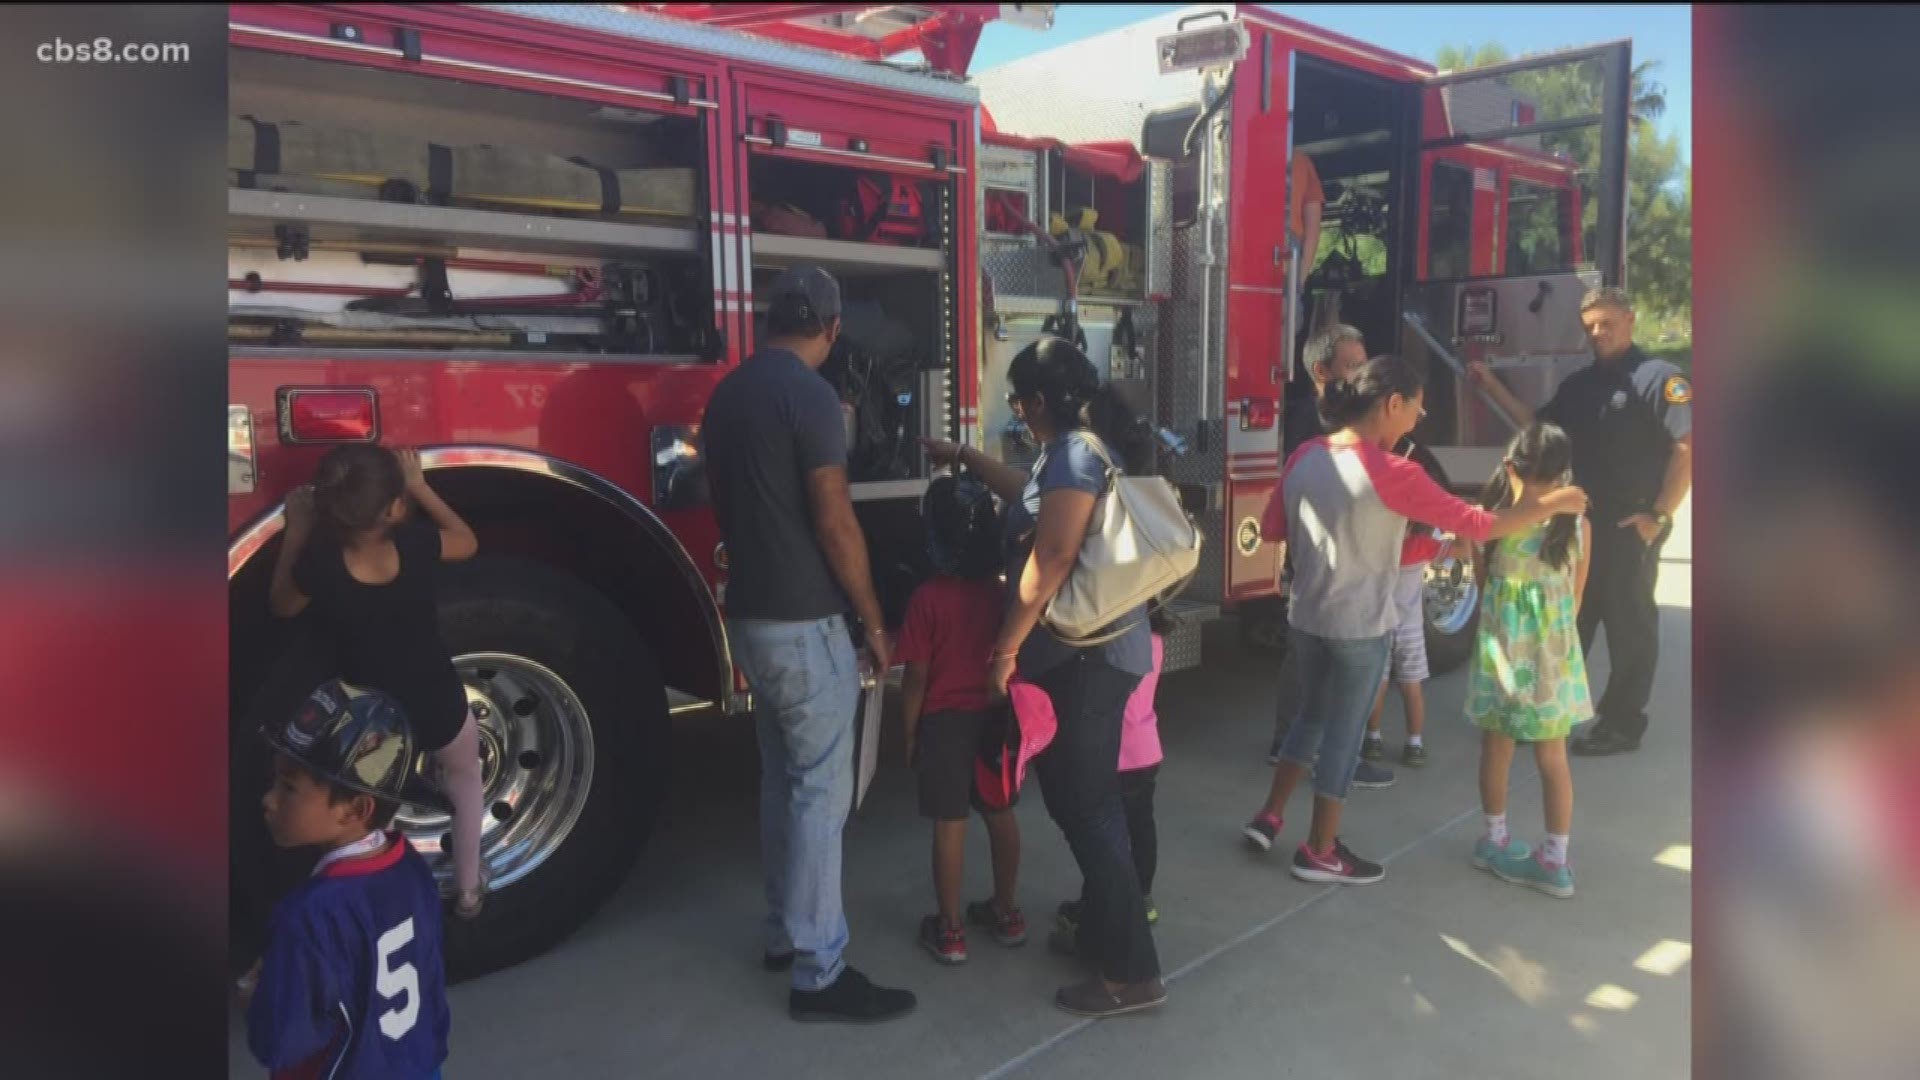 San Diego gets ready to celebrate Fire Prevention Week and Month by raising fire safety awareness and educating families, students and communities.